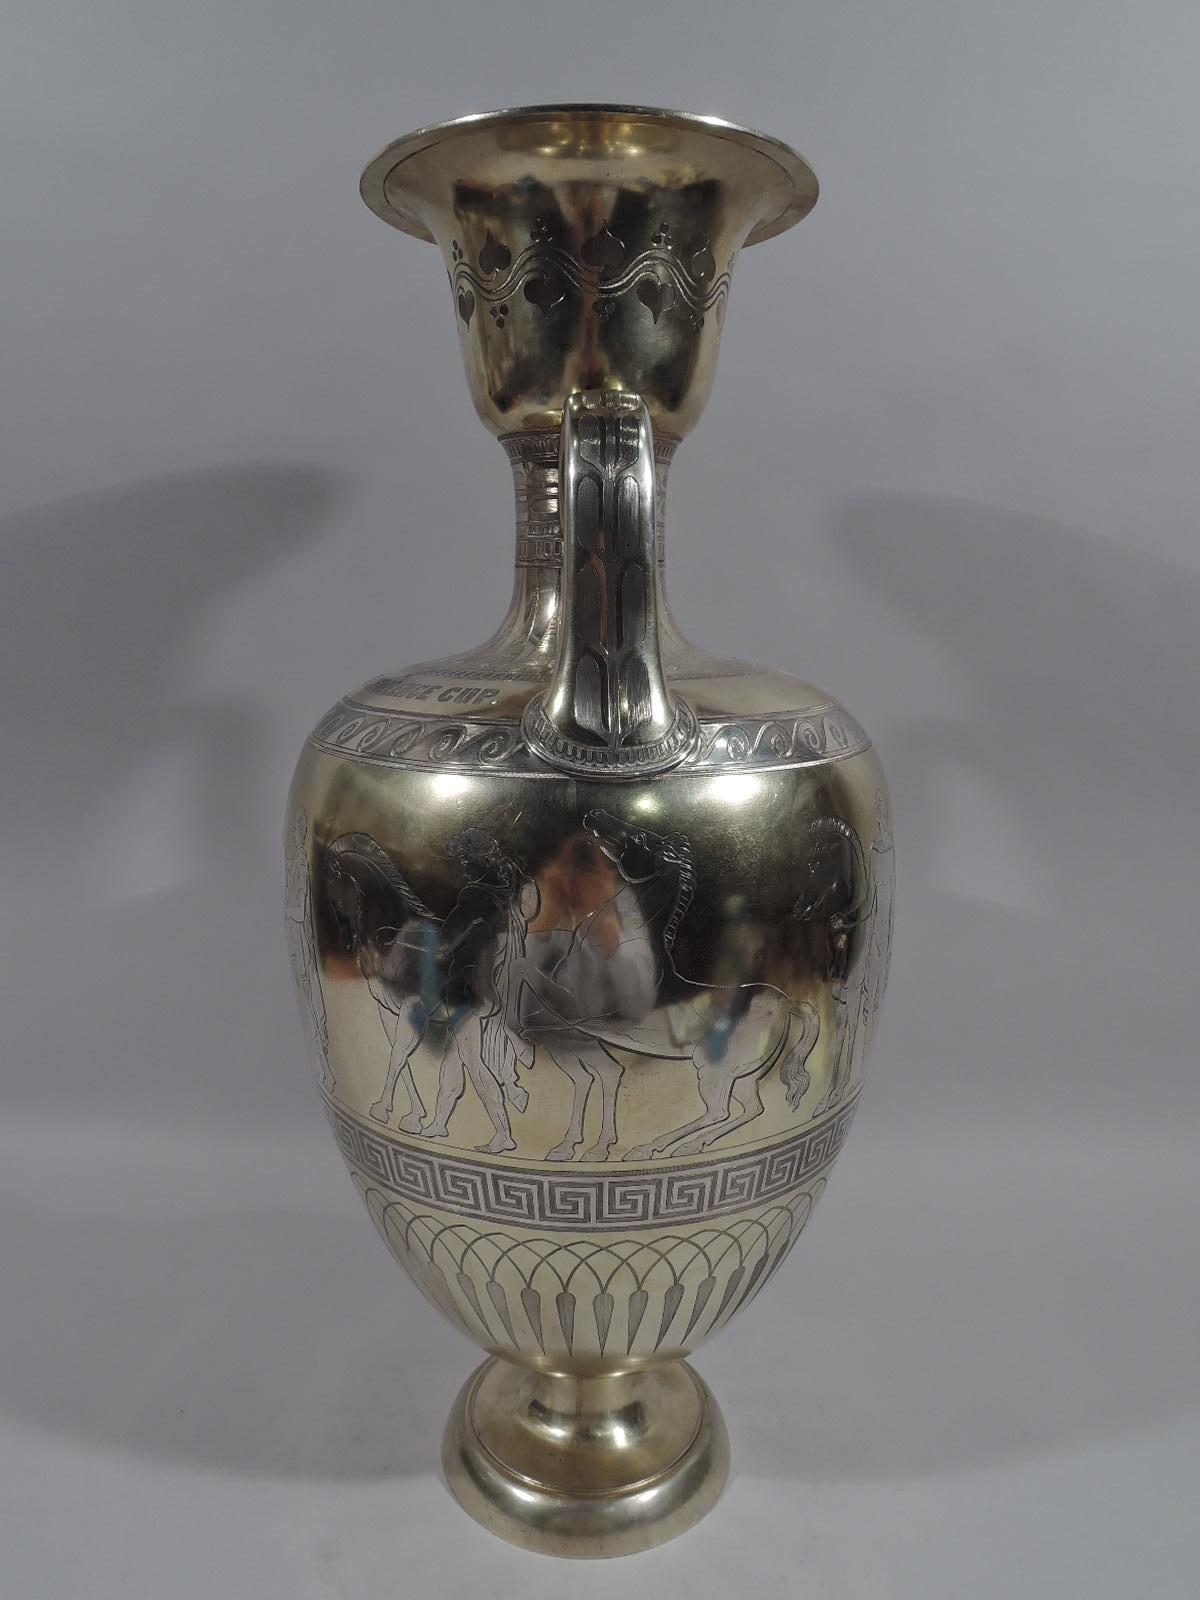 Large English Victorian sterling silver urn, 1866. Traditional Amphora with bell mouth. Parcel gilt with frieze depicting drapery-clad men and horses inspired by ancient pottery. Midcentury Neo-Grec design with stylized ornament including Classical